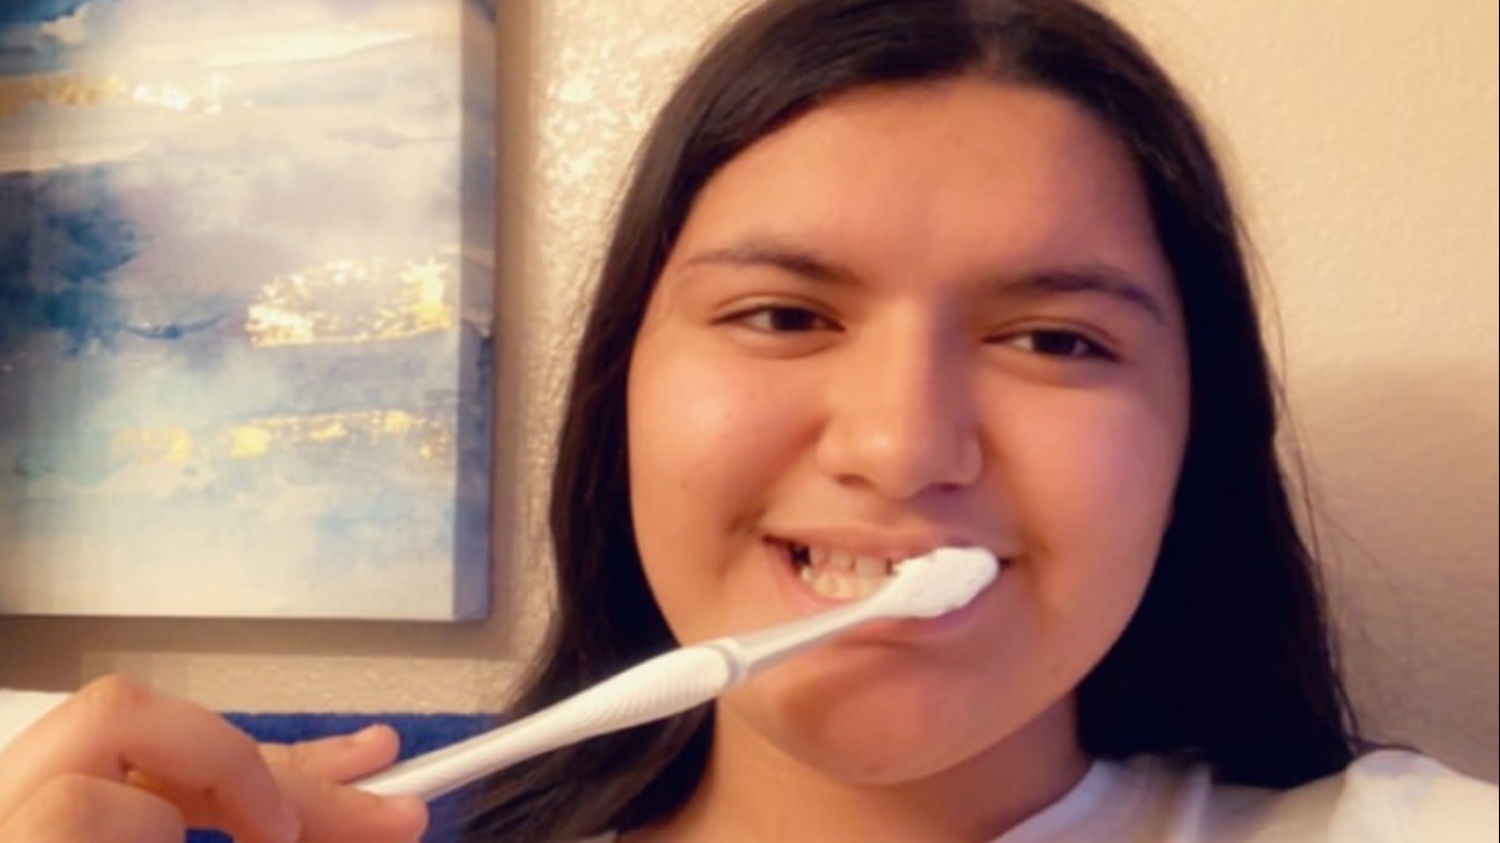 Students+enrolled+in+the+Dental+Assisting+program+are+utilizing+their+learned+skills+at+home+by+brushing+their+own+teeth.+This+not+only+helps+them+practice%2C+but+also+ensures+that+they+are+hygienic.+%E2%80%9CThe+Dental+Assisting+program+has+helped+me+learn+more+about+dentistry+and+gets+me+closer+to+my+dreams.+Even+the+little+things+like+brushing+my+teeth+gives+me+practice%2C%E2%80%9D+Wendy+Ramirez%2C+a+sophomore%2C+said.+Photo+Credit%3A+Wendy+Ramirez